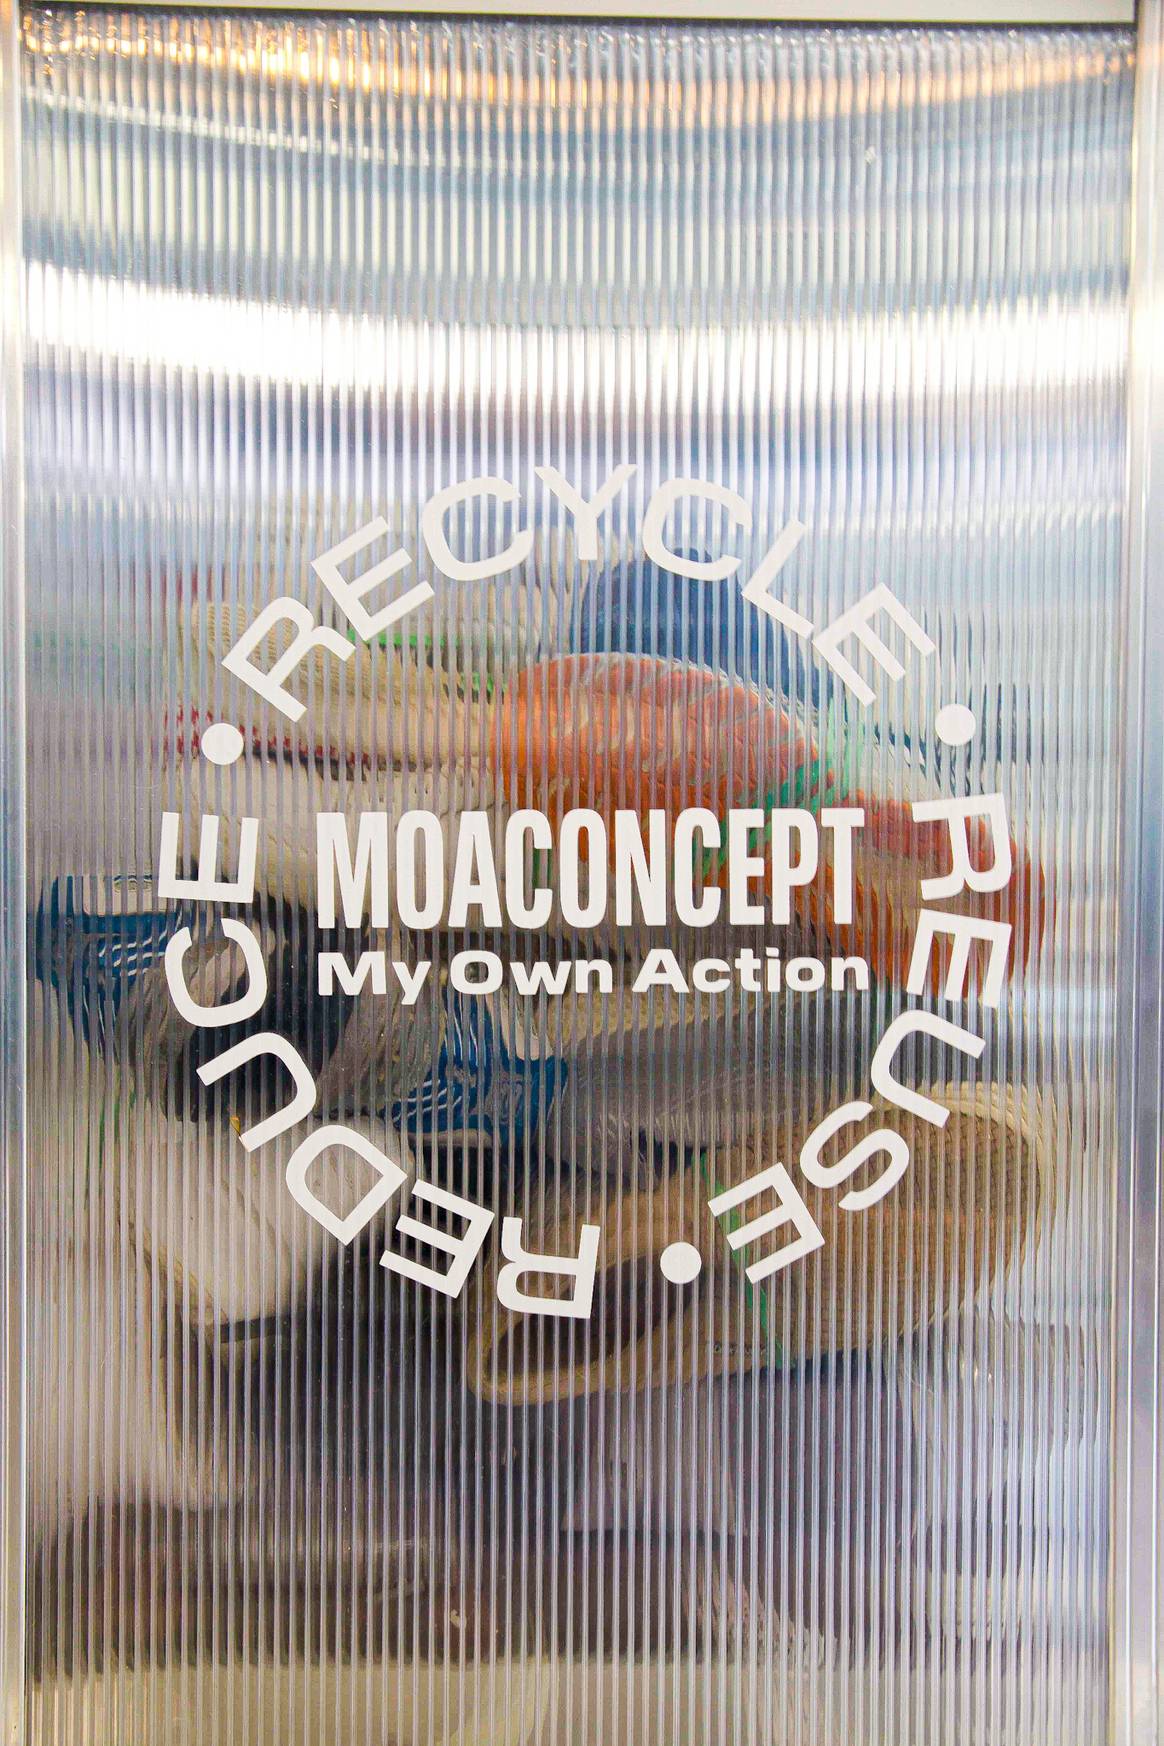 Image: Moaconcept, courtesy of the brand